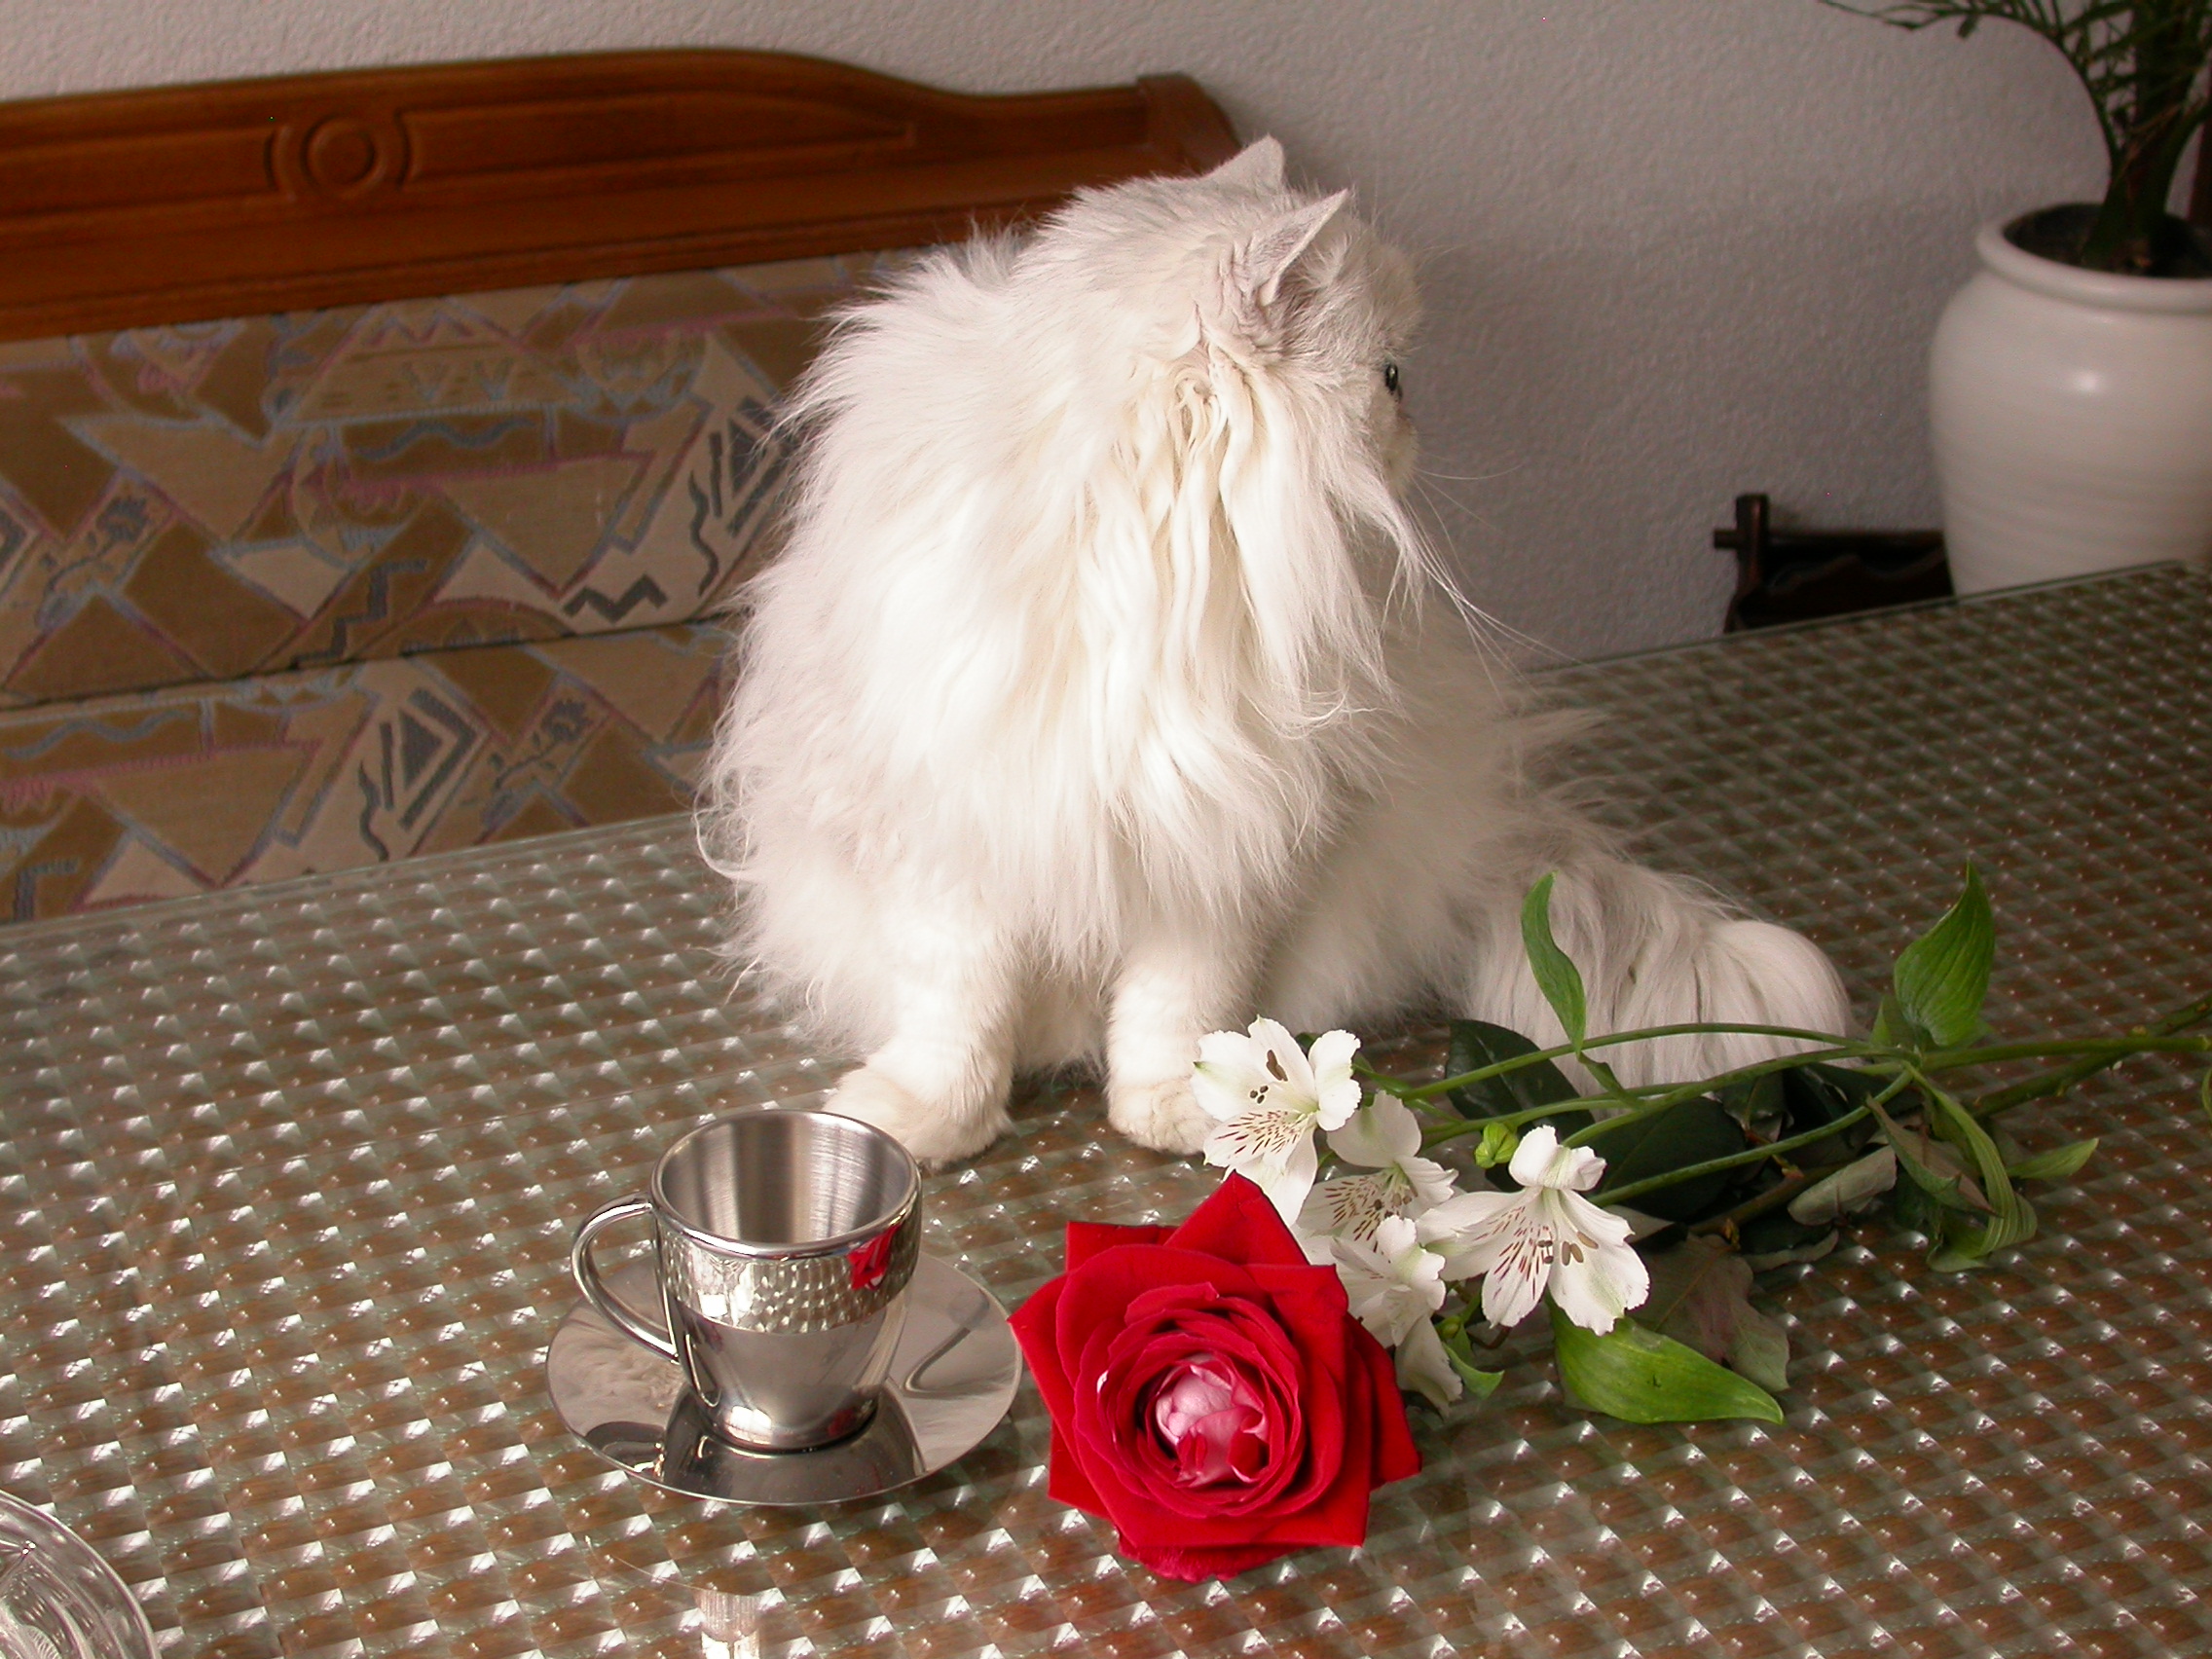 eva white angora cat on a table with a red rose and white flowers at its feet free